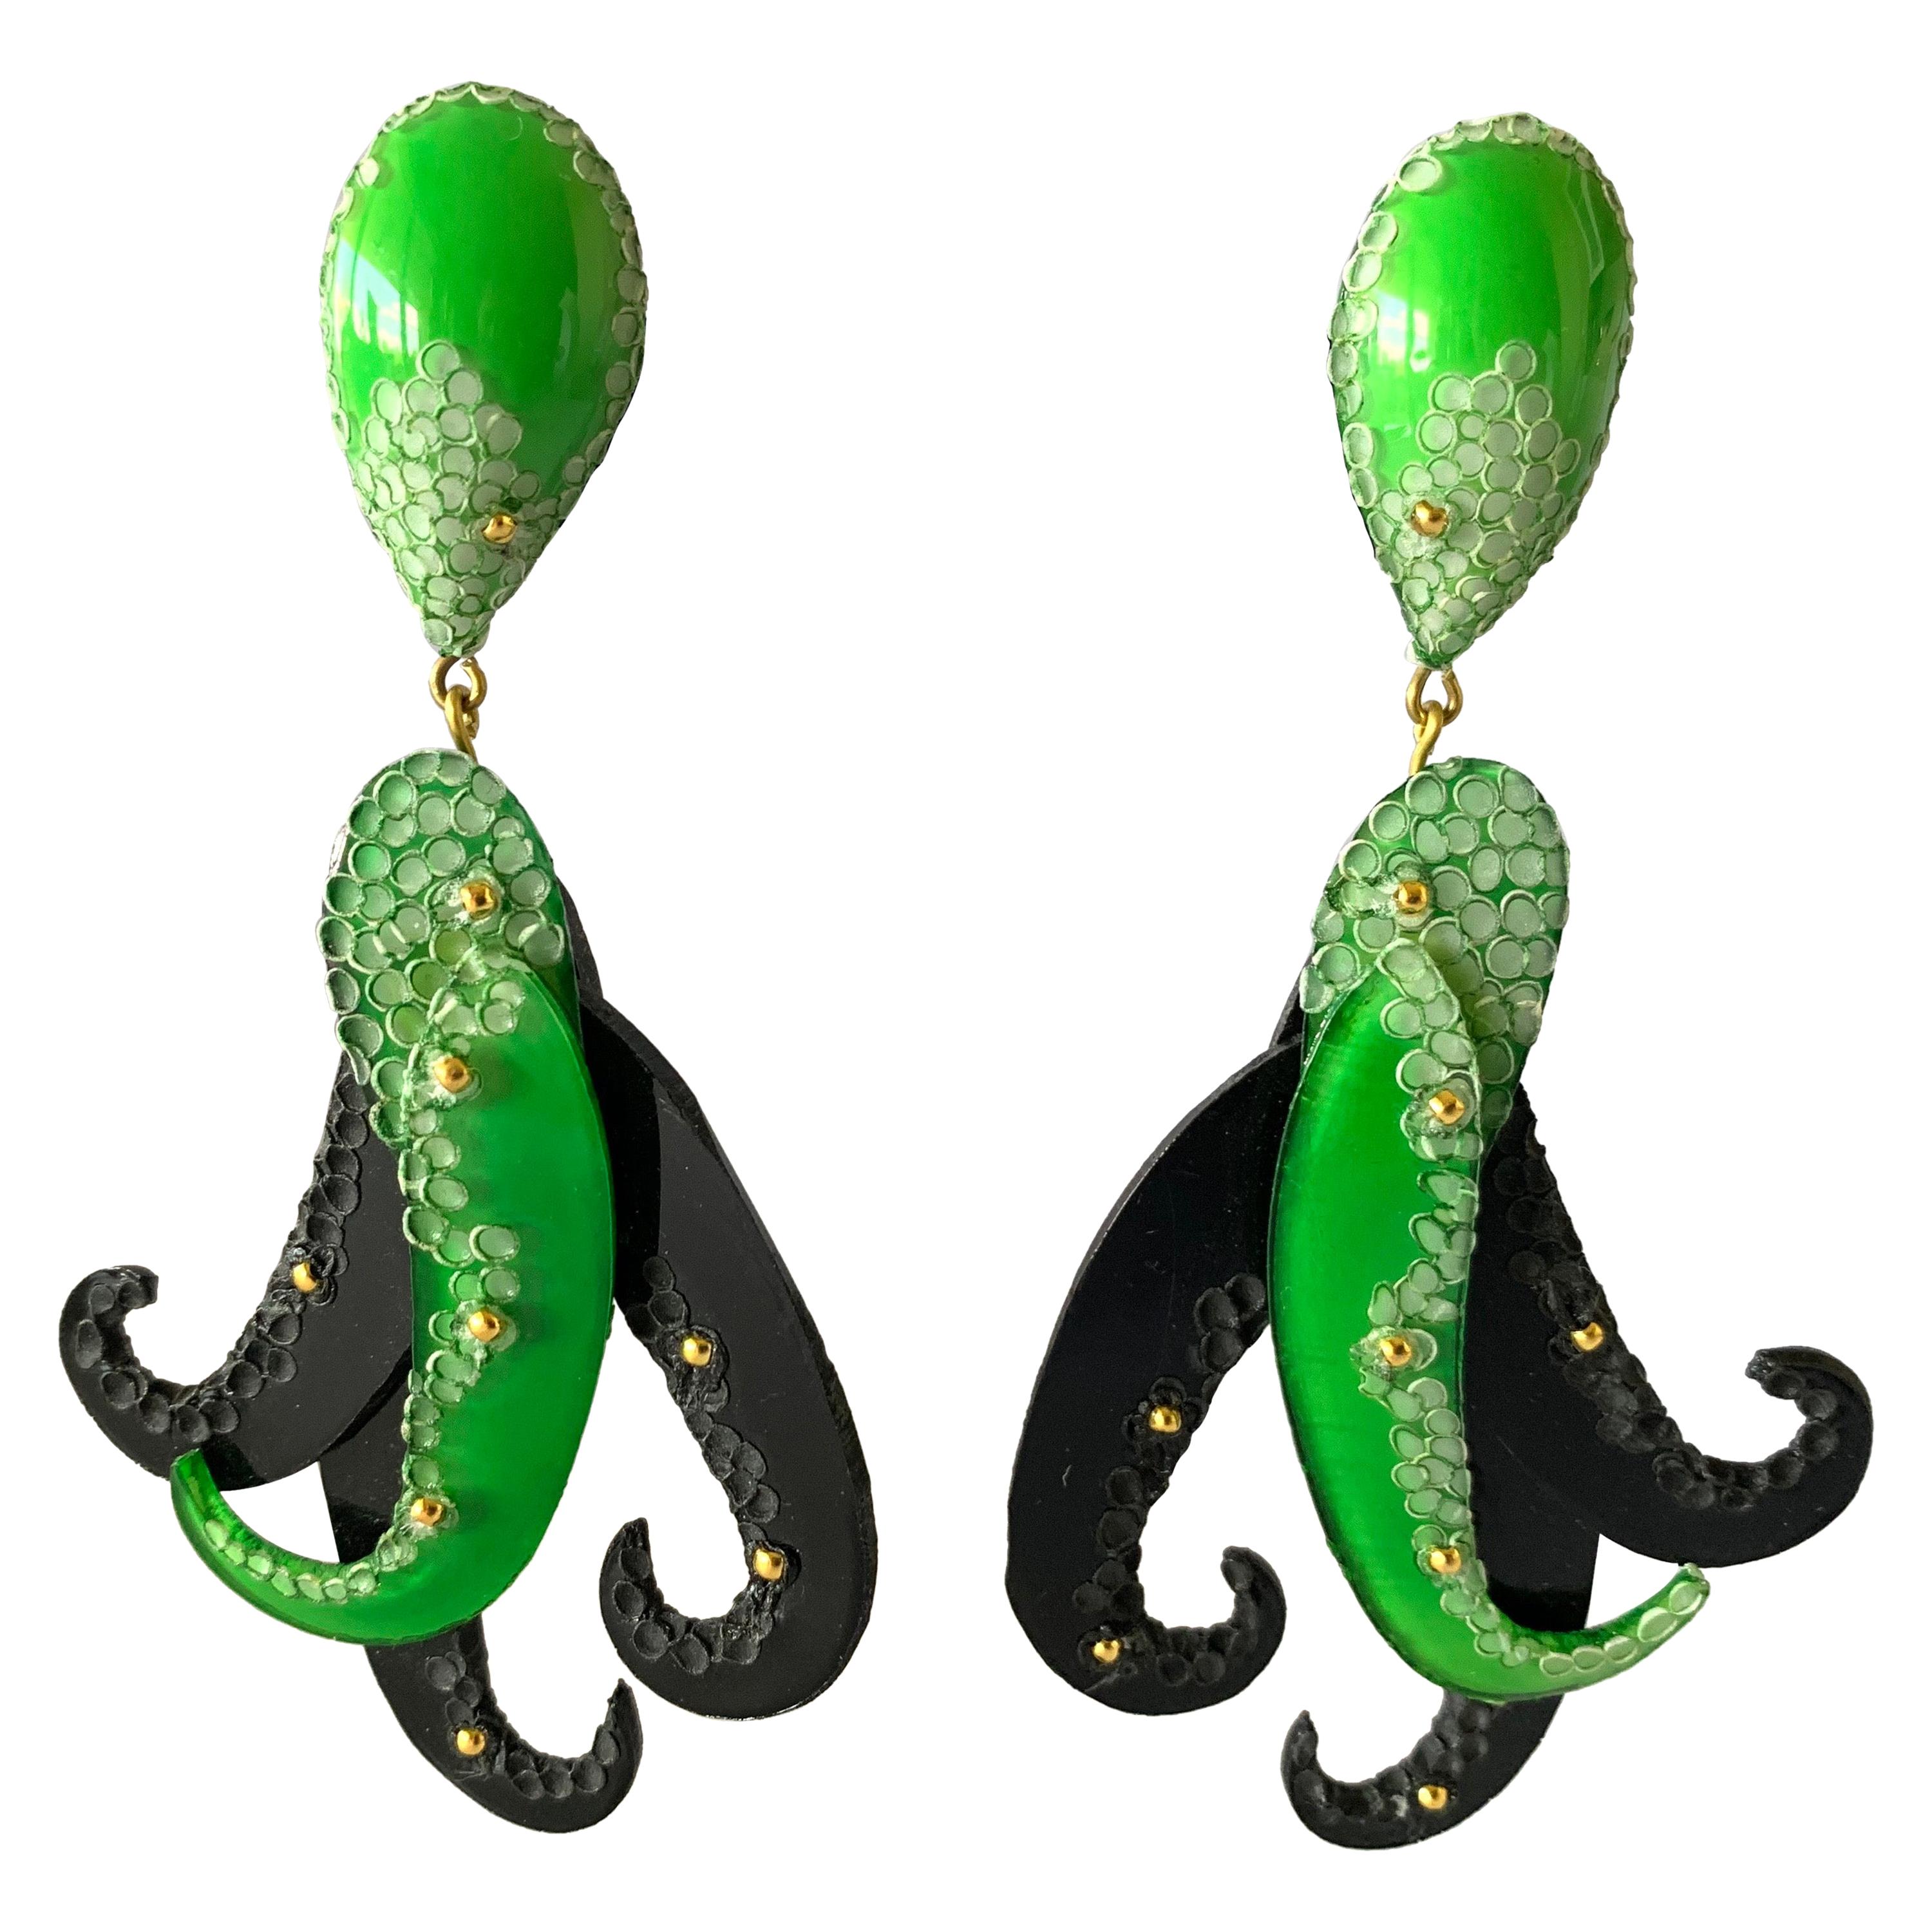 Contemporary Green and Black Sea Creature Statement Earrings 